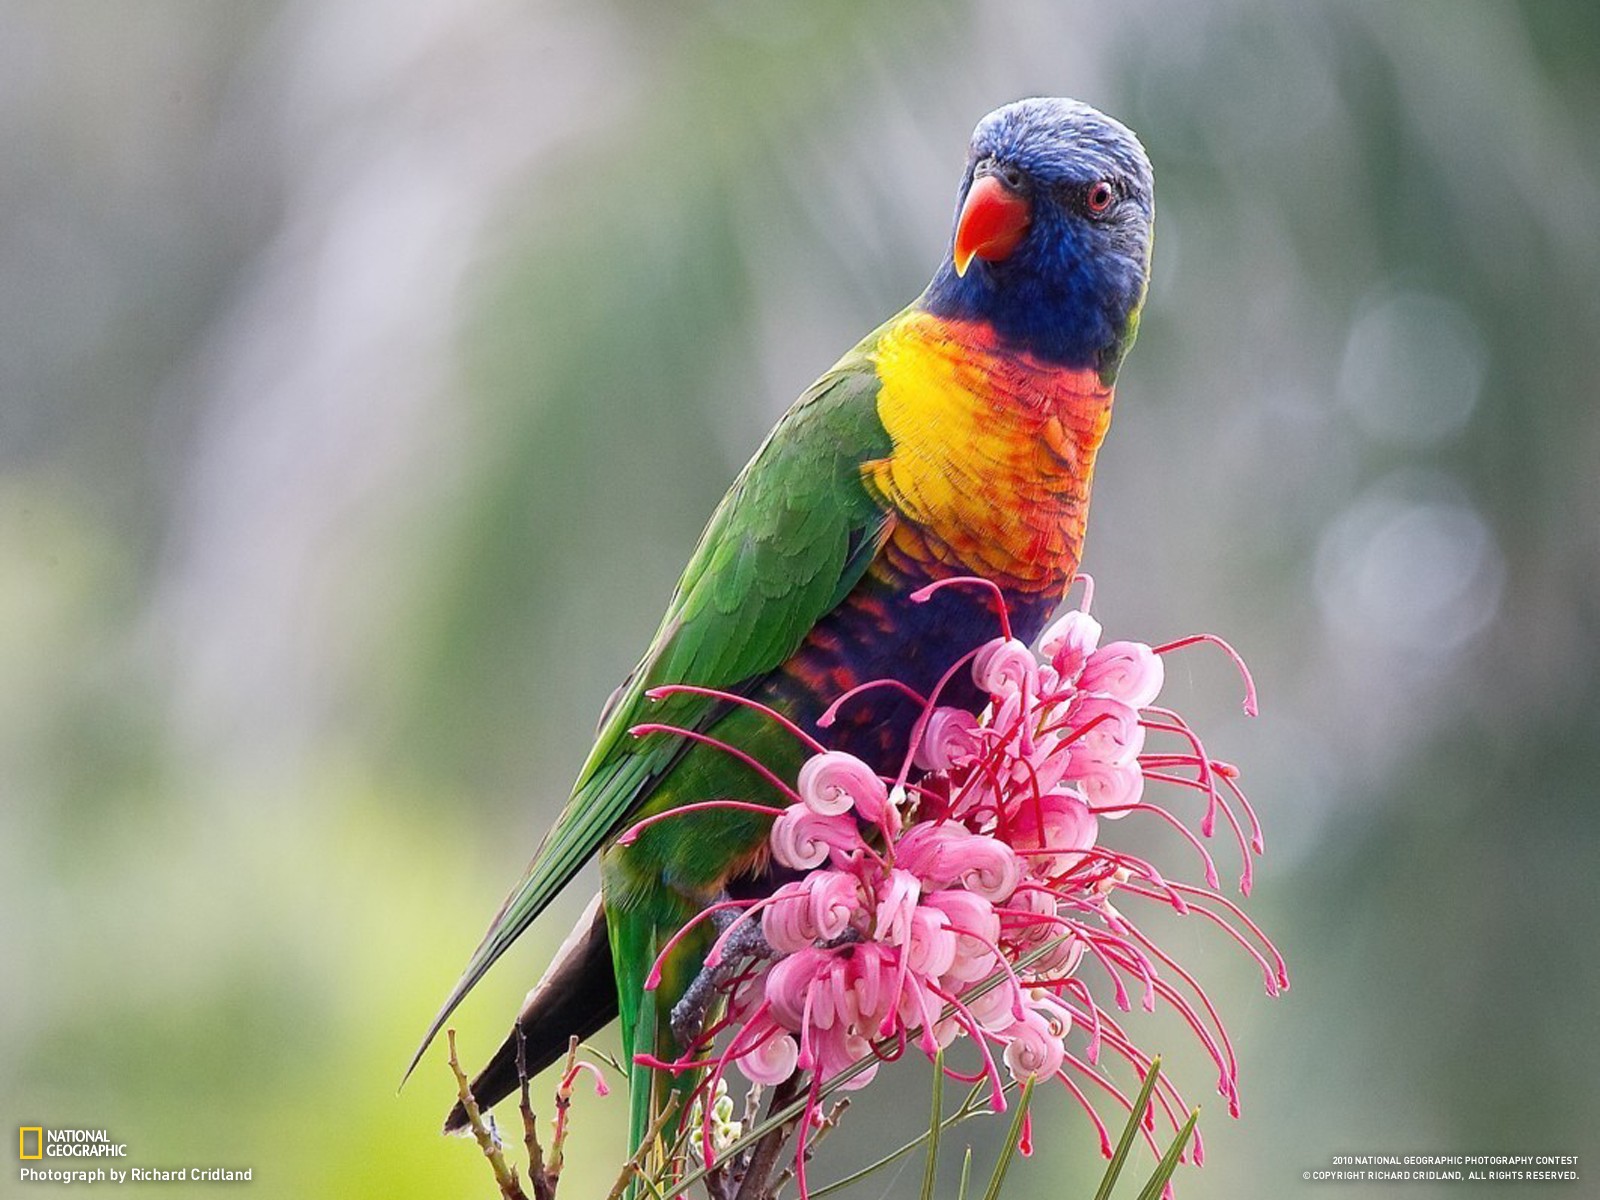 General 1600x1200 birds flowers National Geographic parrot lorikeet plants animals 2010 (Year) colorful outdoors